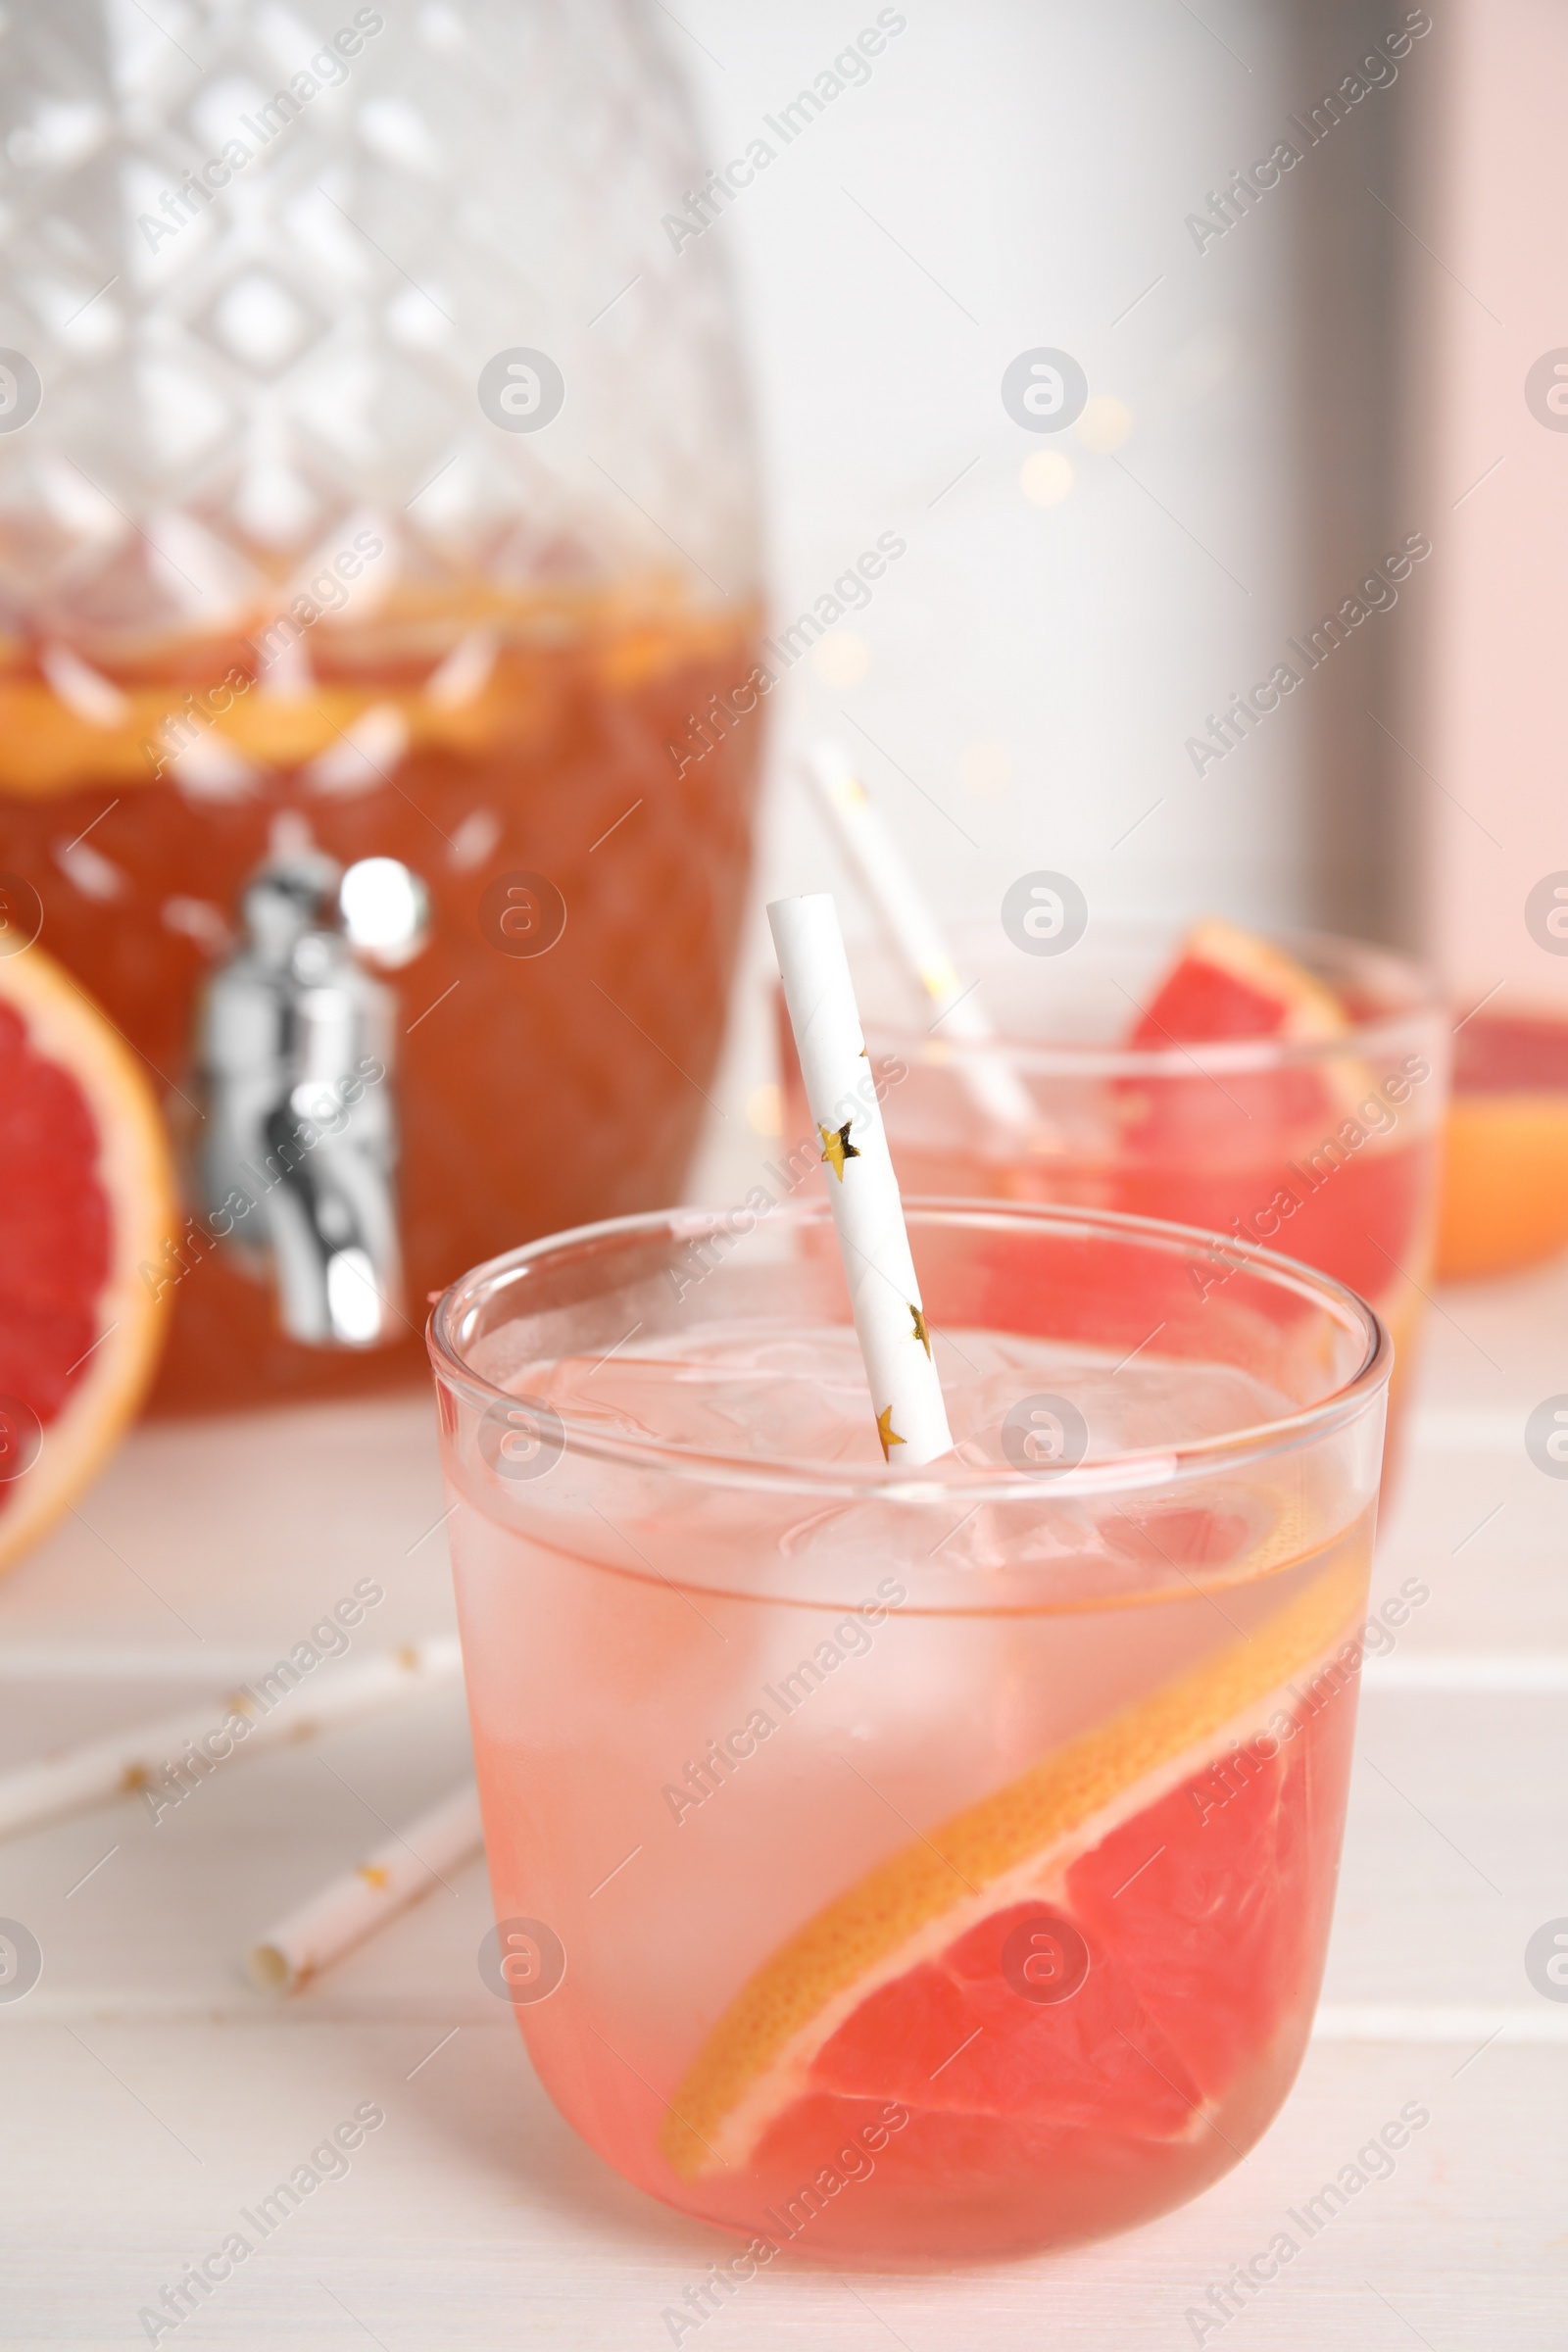 Photo of Delicious refreshing lemonade with grapefruit slices on white wooden table